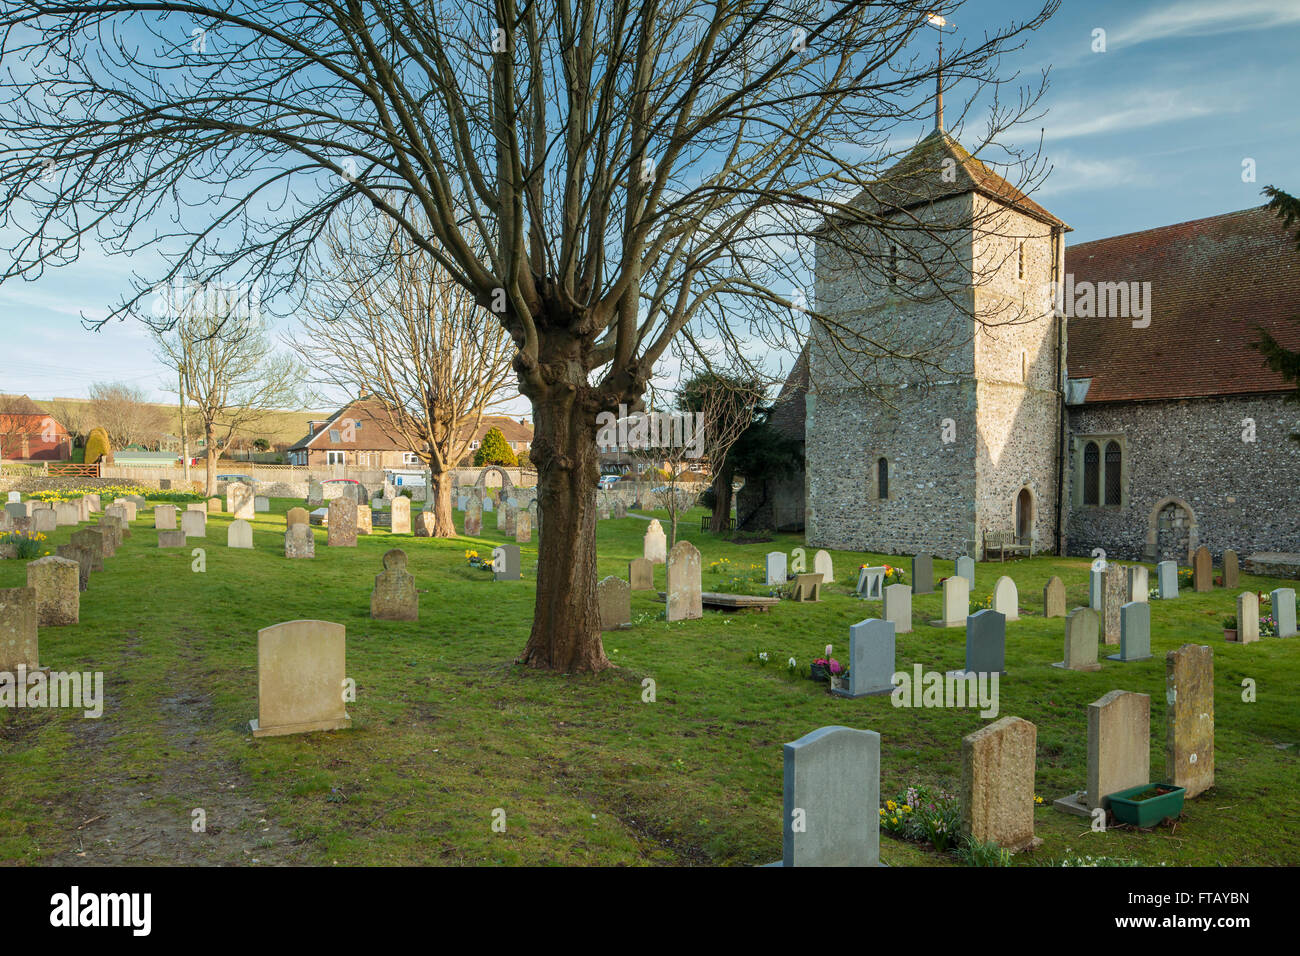 St Simon and St Jude church in East Dean, East Sussex, UK. South Downs. Stock Photo